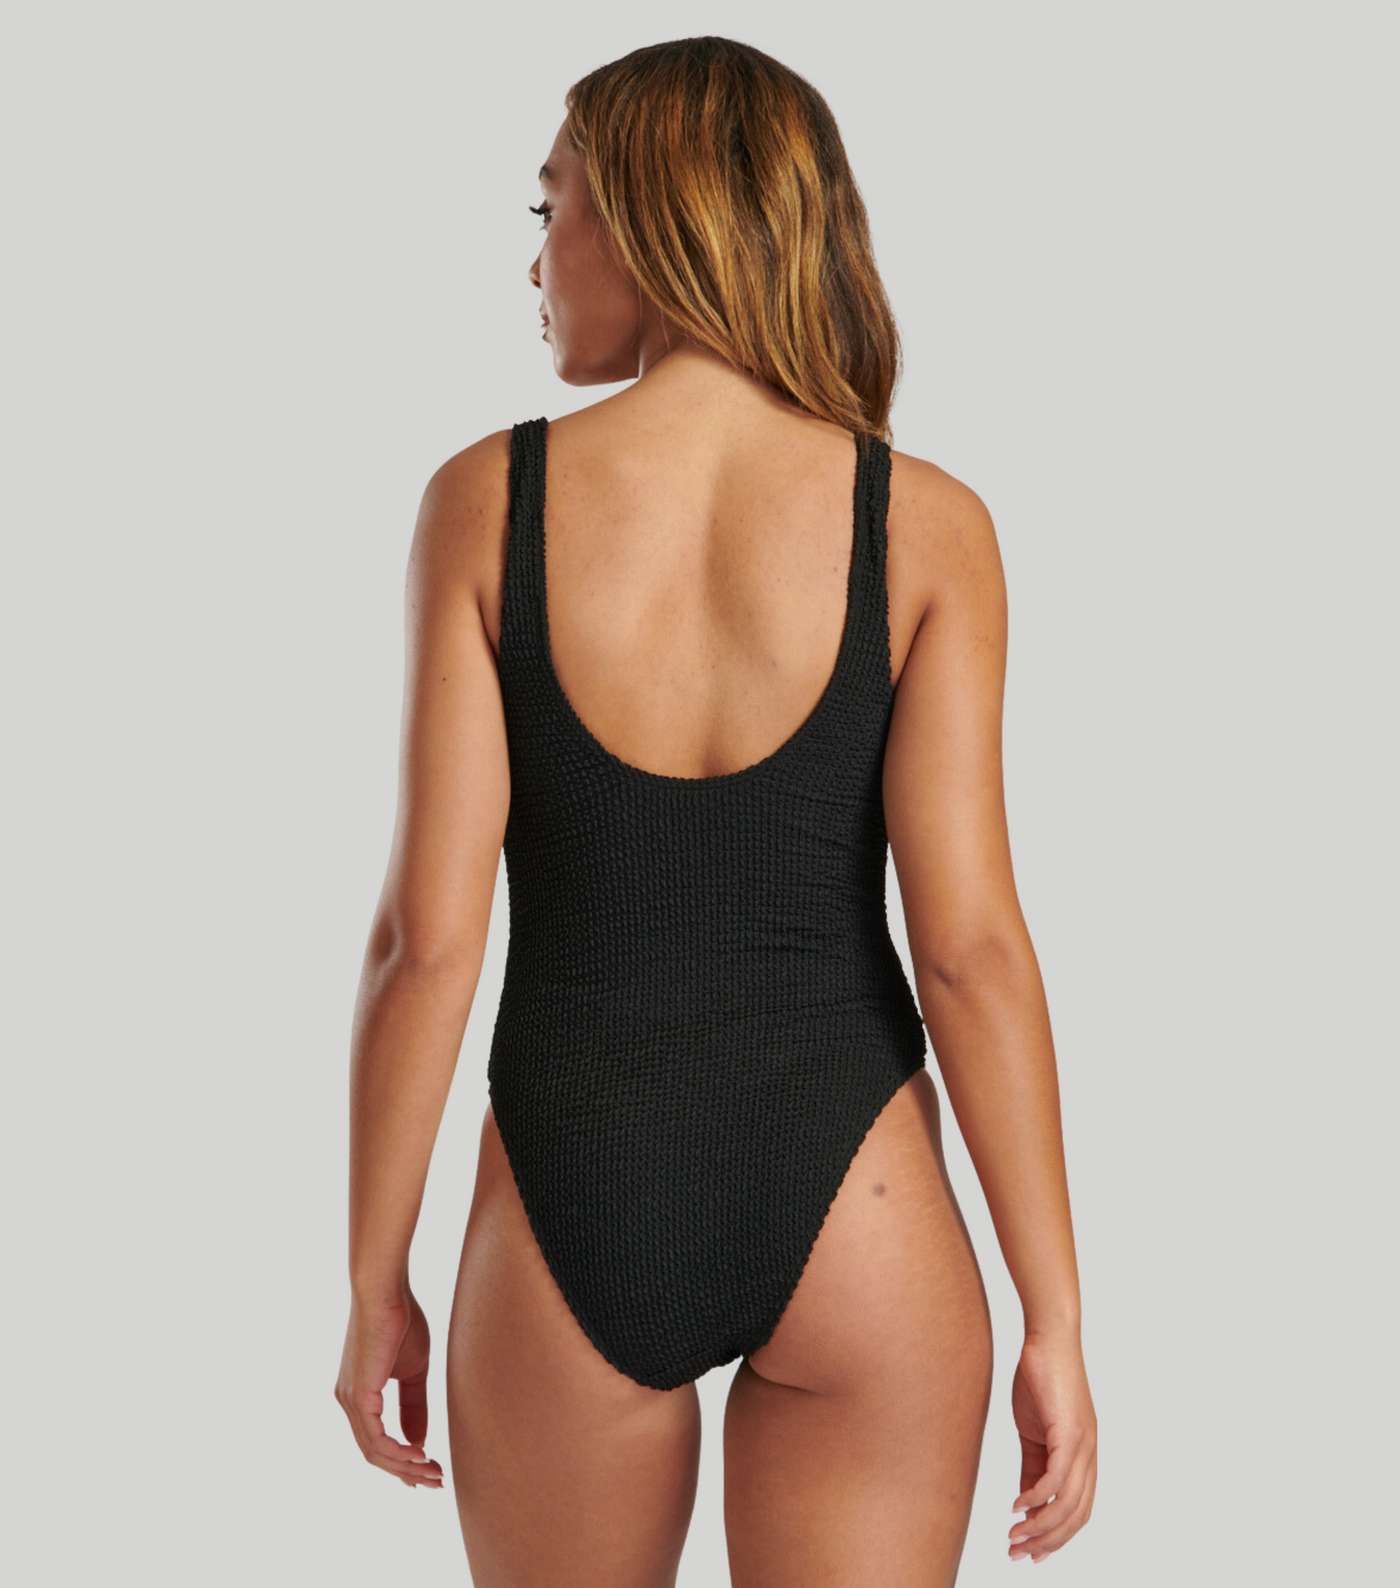 South Beach Black Textured Crinkle Swimsuit Image 5